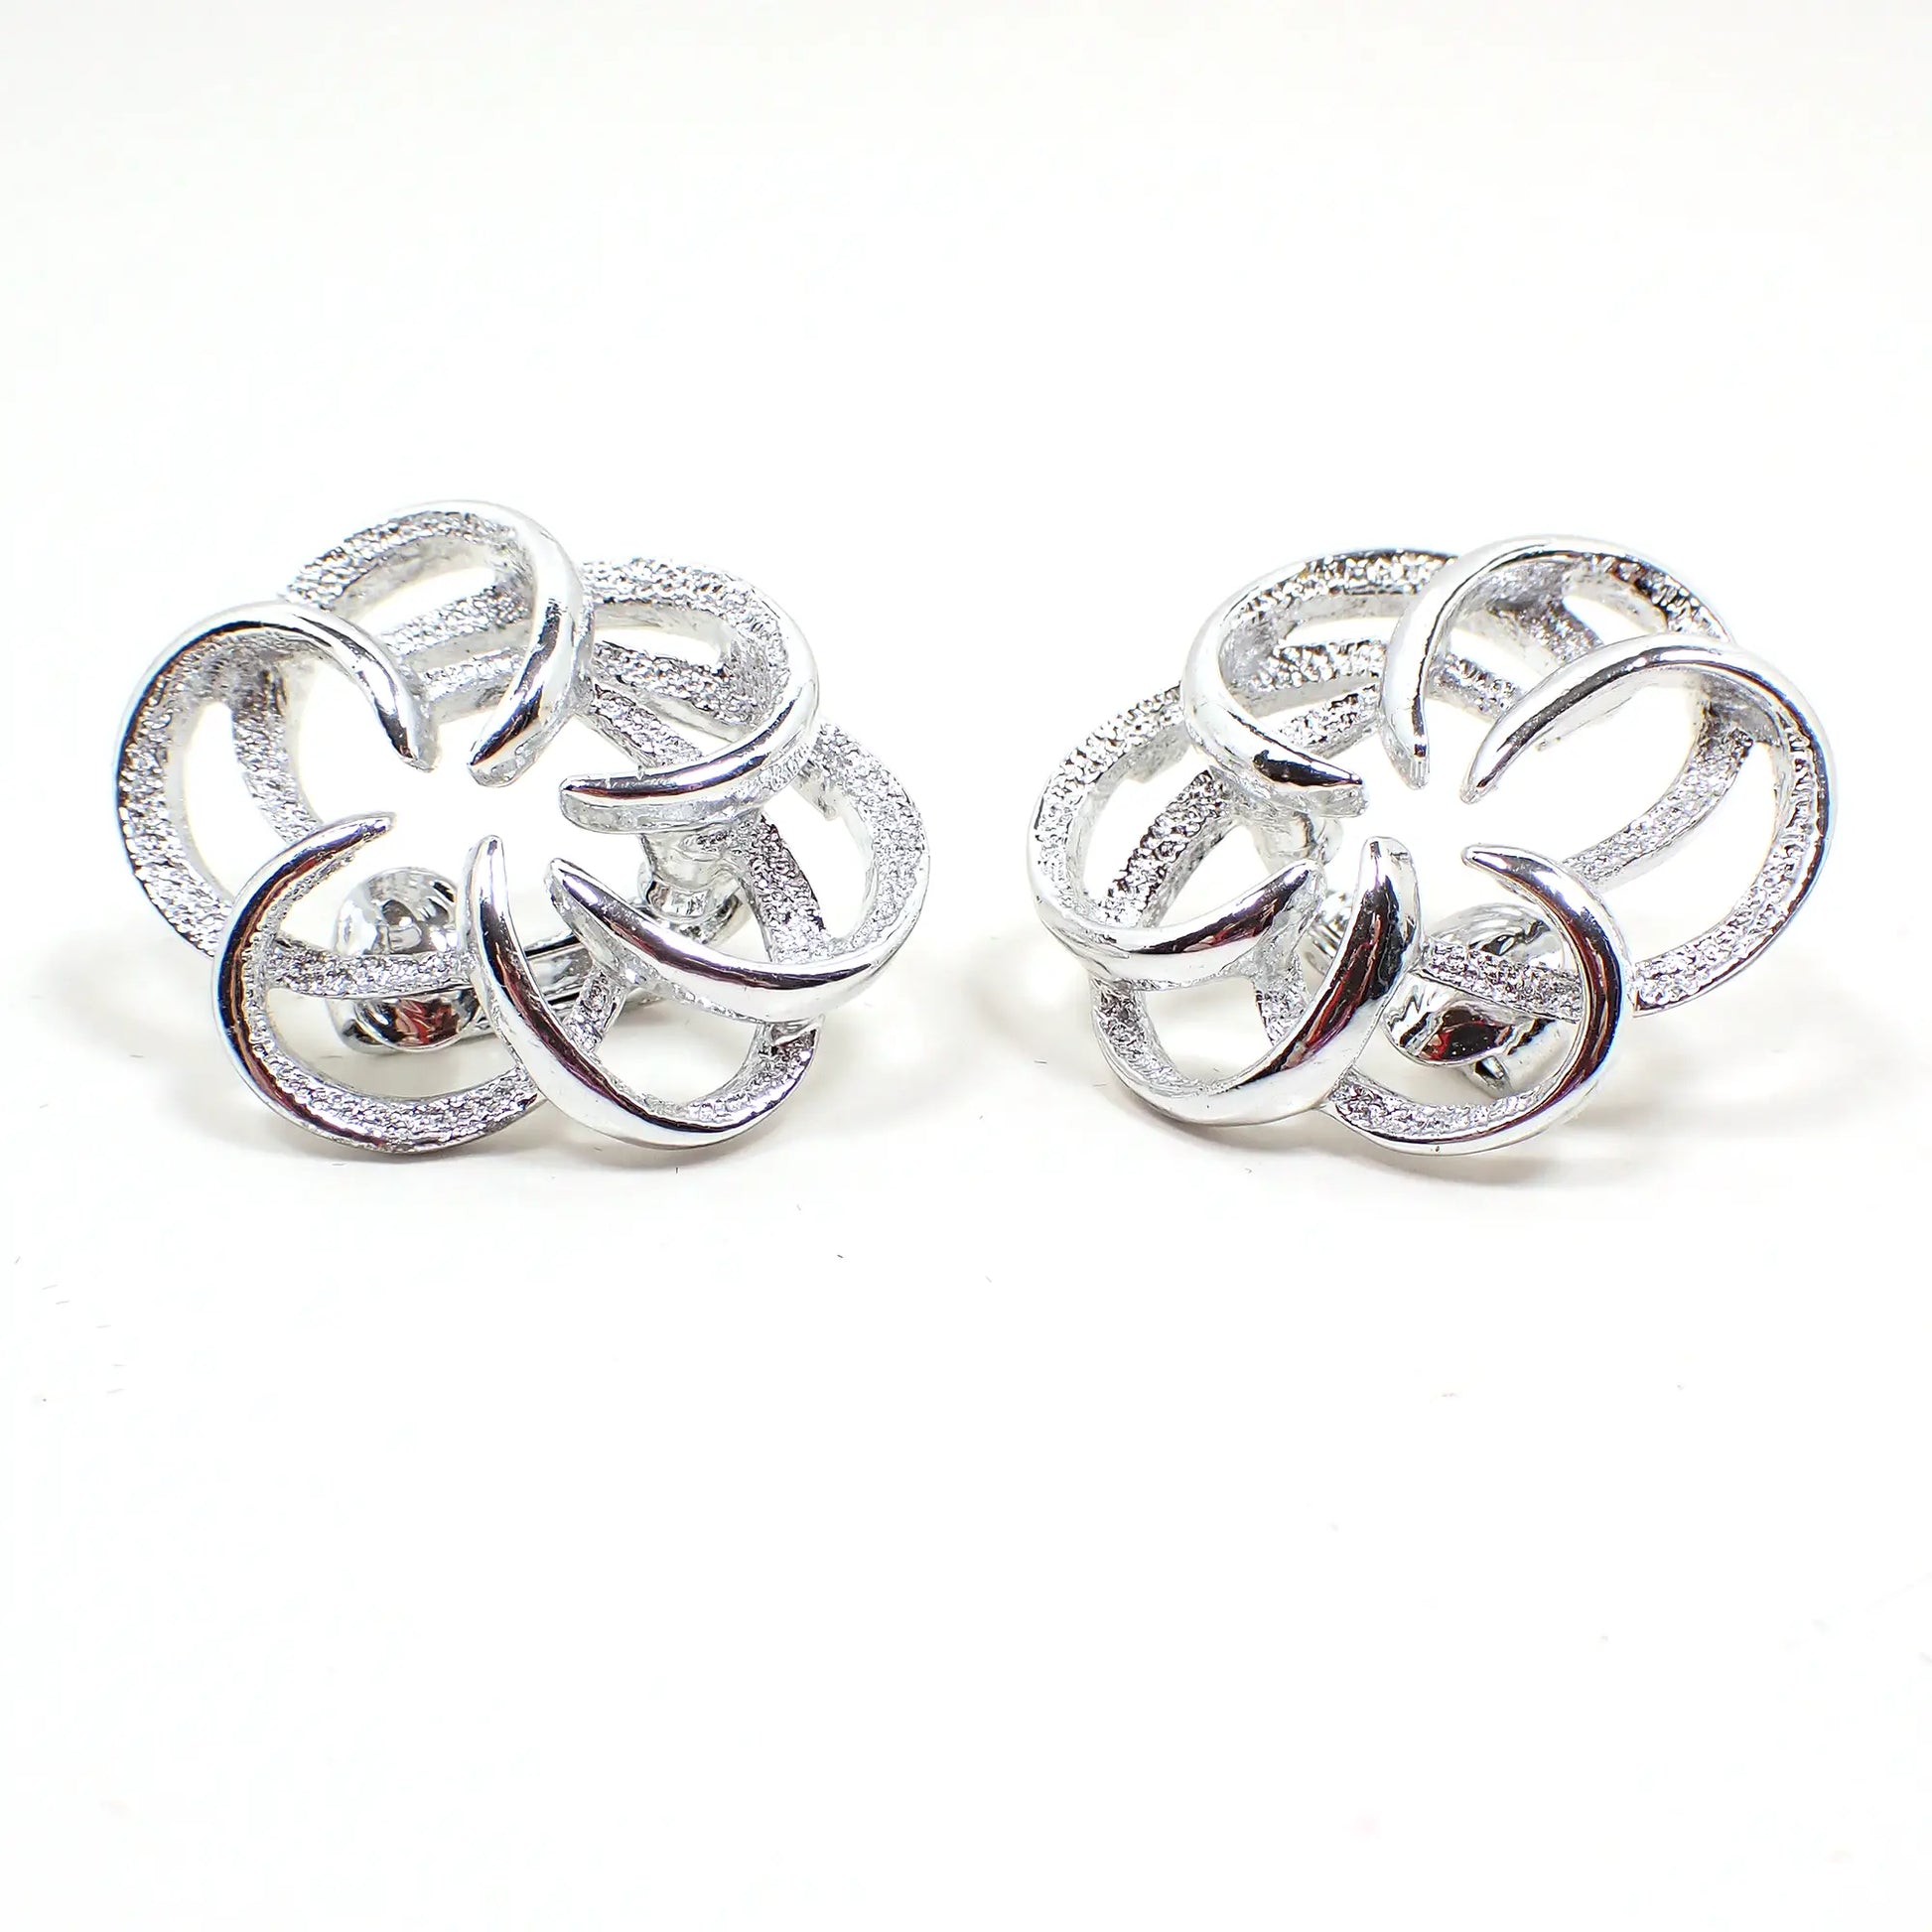 Front view of the Mid Century vintage Sarah Coventry Tailored Swirl earrings. The metal is silver tone in color. They are shaped like a swirled pinwheel with open textured matte and shiny areas.